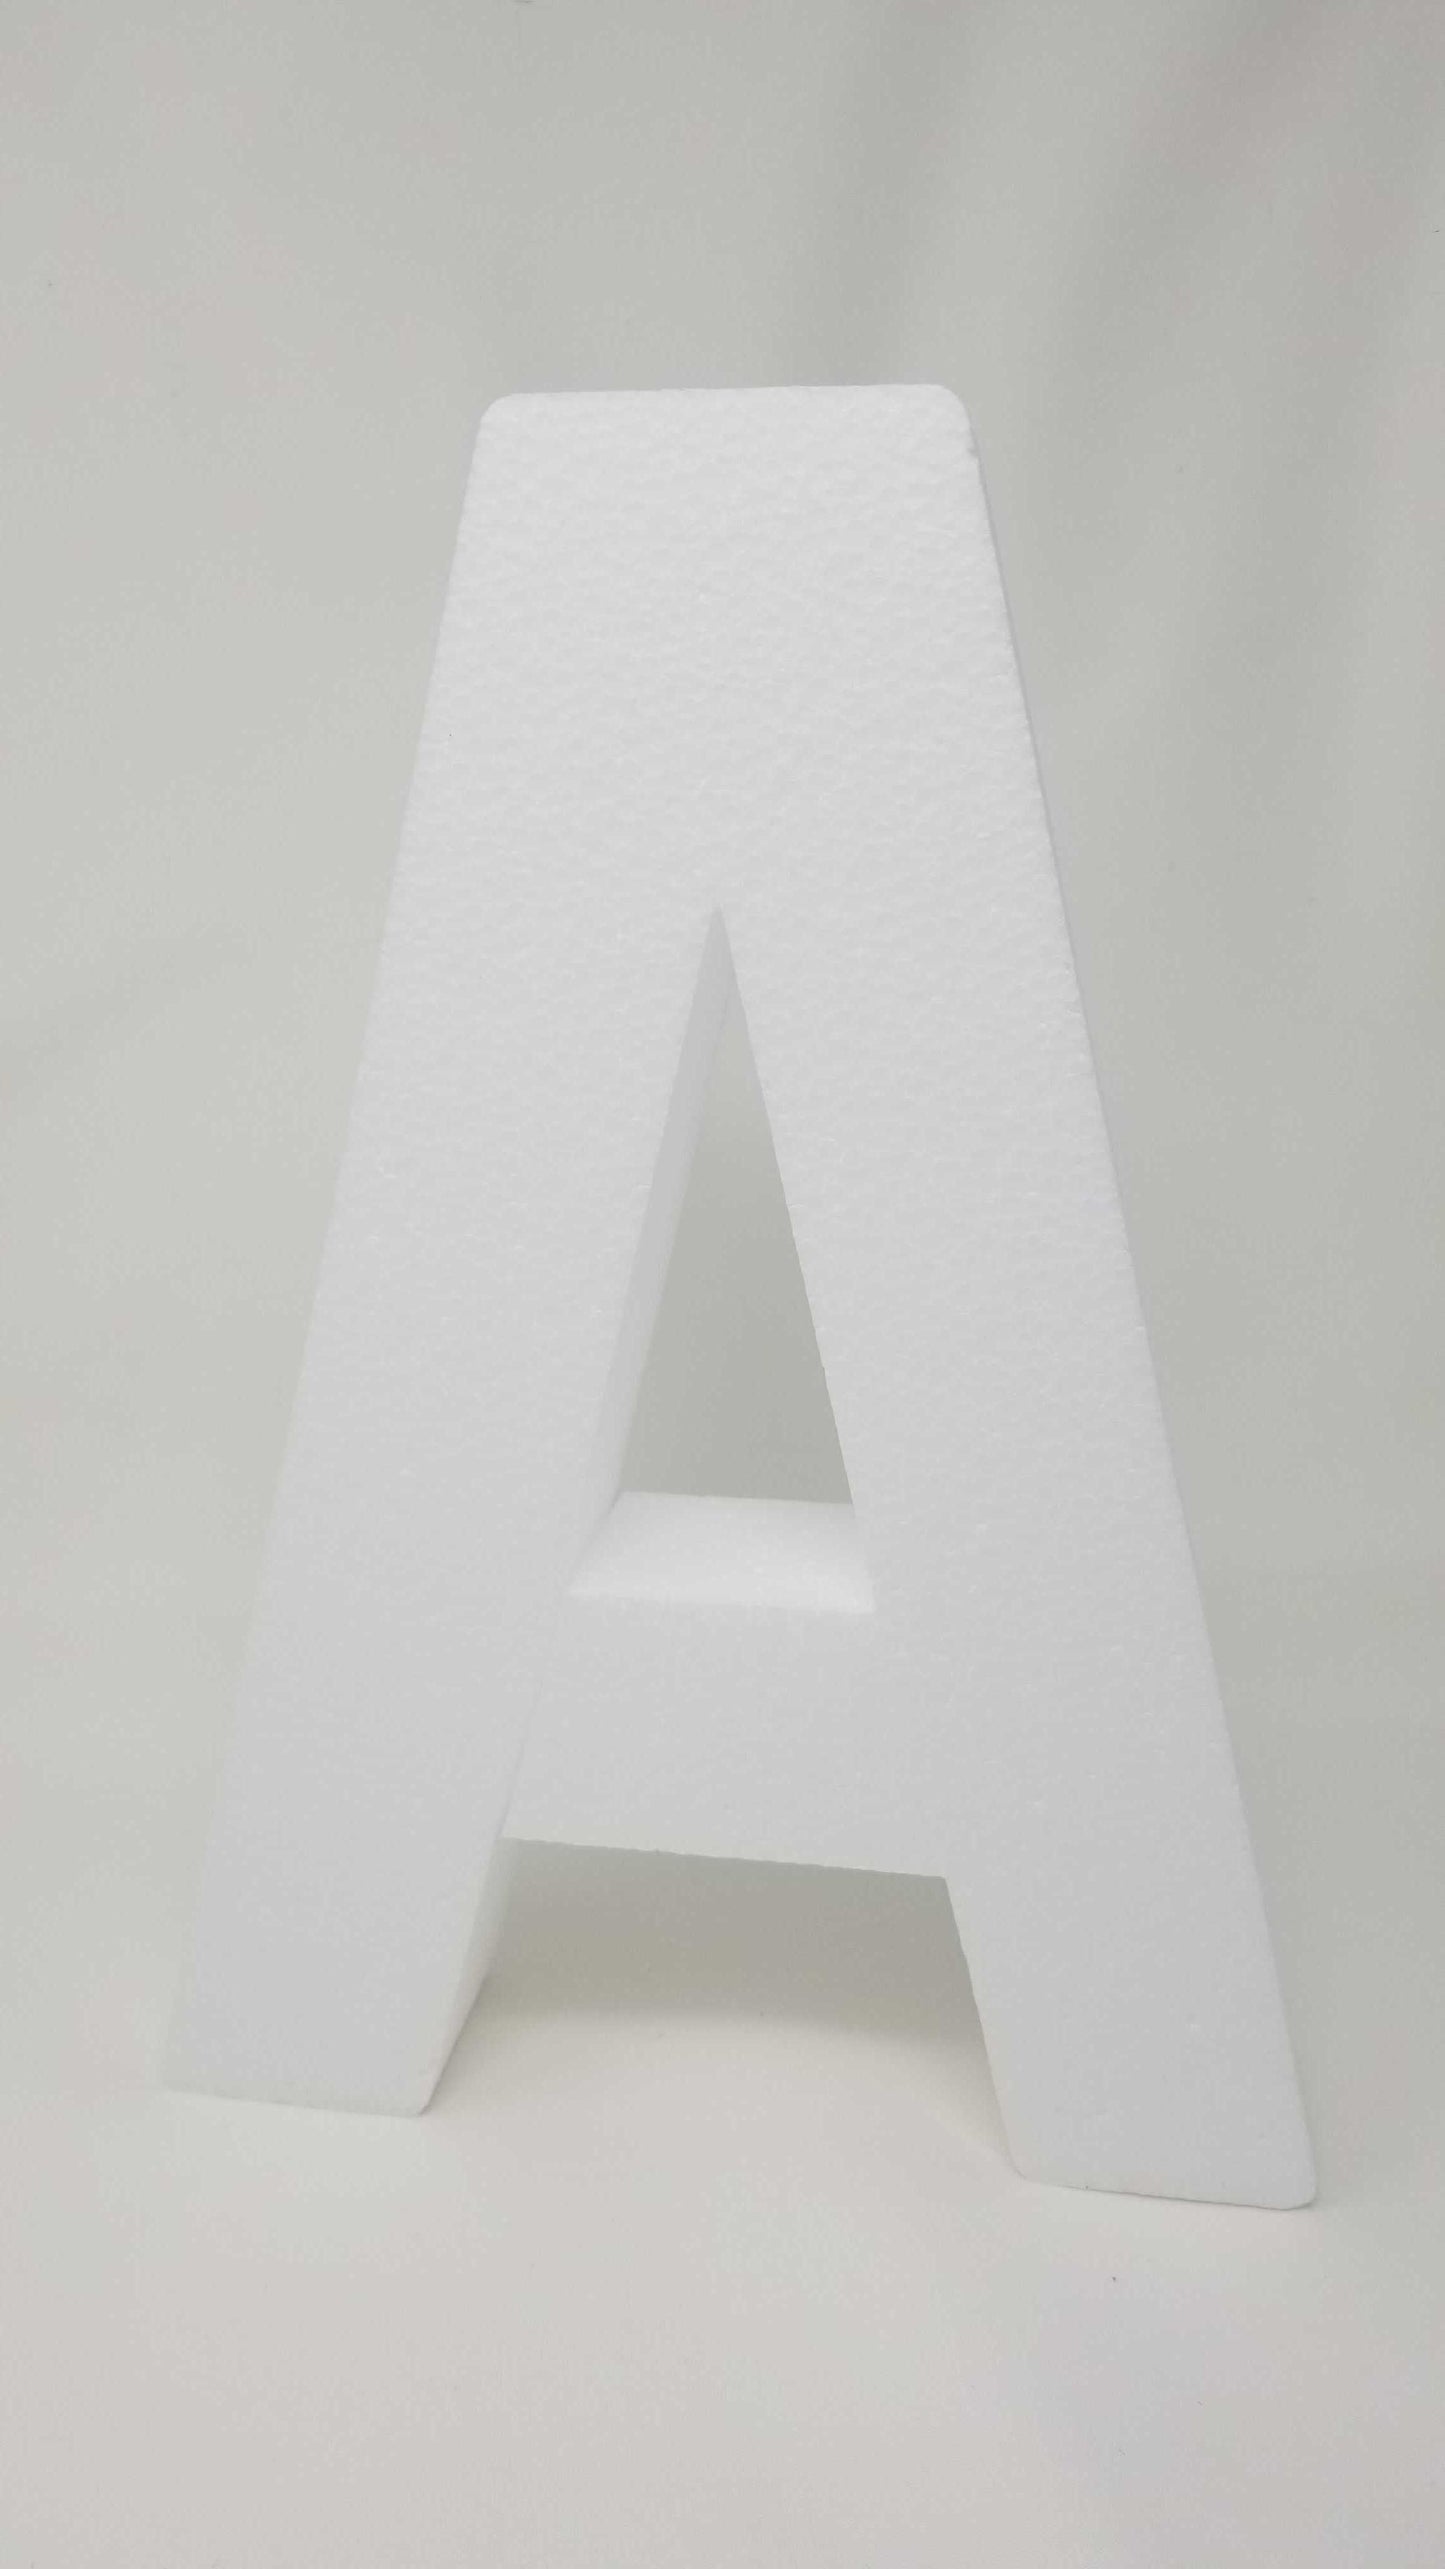 Foam Letter and Number Shapes - 24" Tall